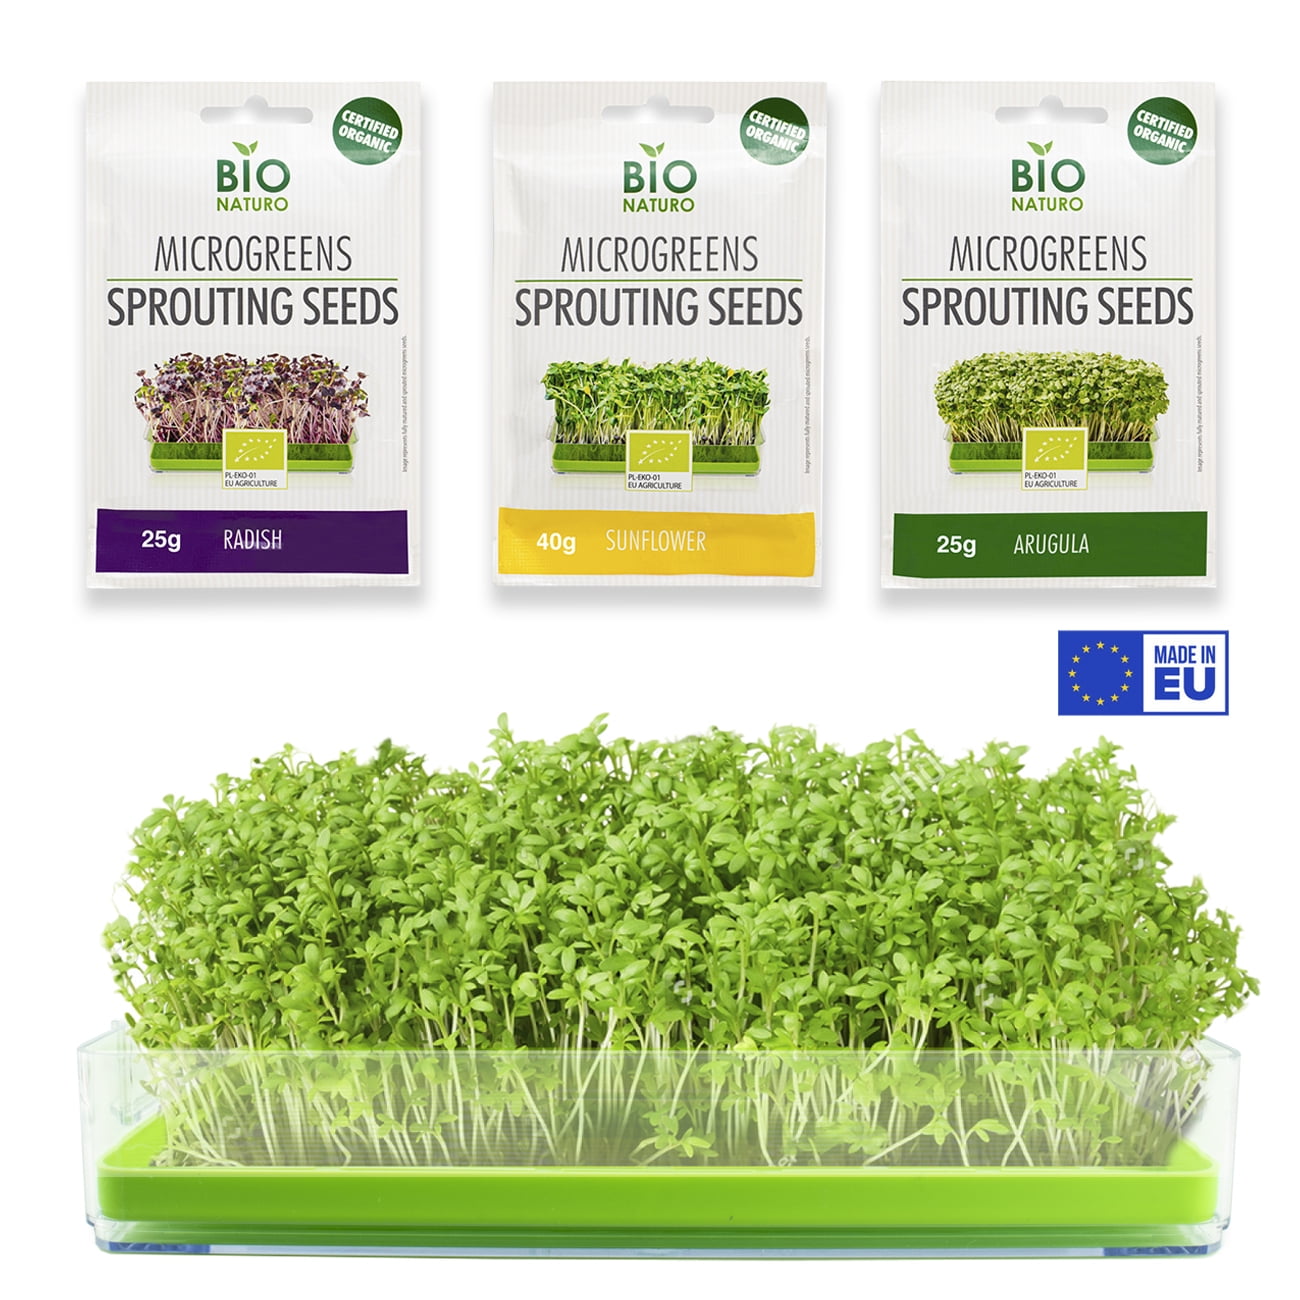 Grow Your Own Microgreens in 14 Days Broccoli Kale Immune Boost Farm in A Box by Teeny Greeny Pea Rocket